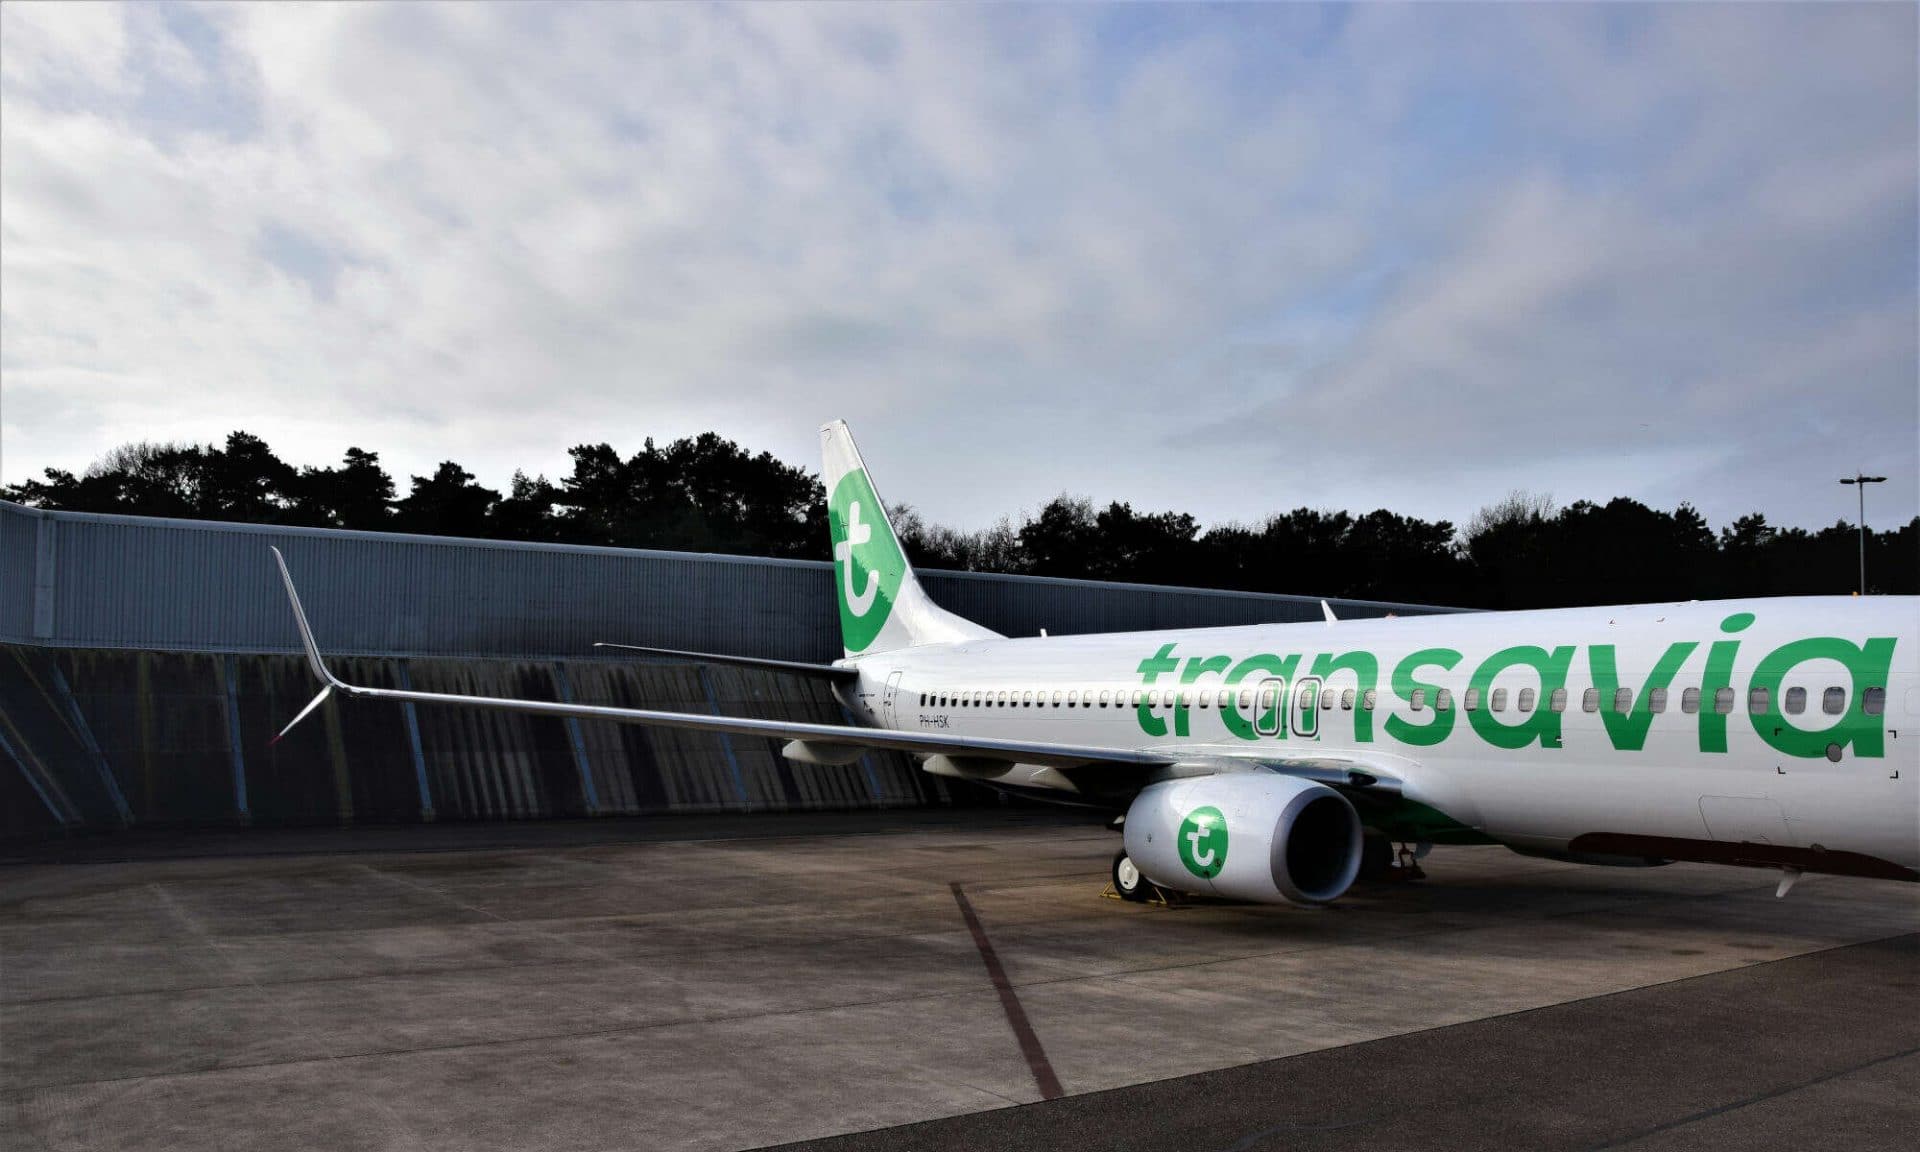 A Transavia plane blocks taxiway at Ibiza airport, causing delays in departures and arrivals